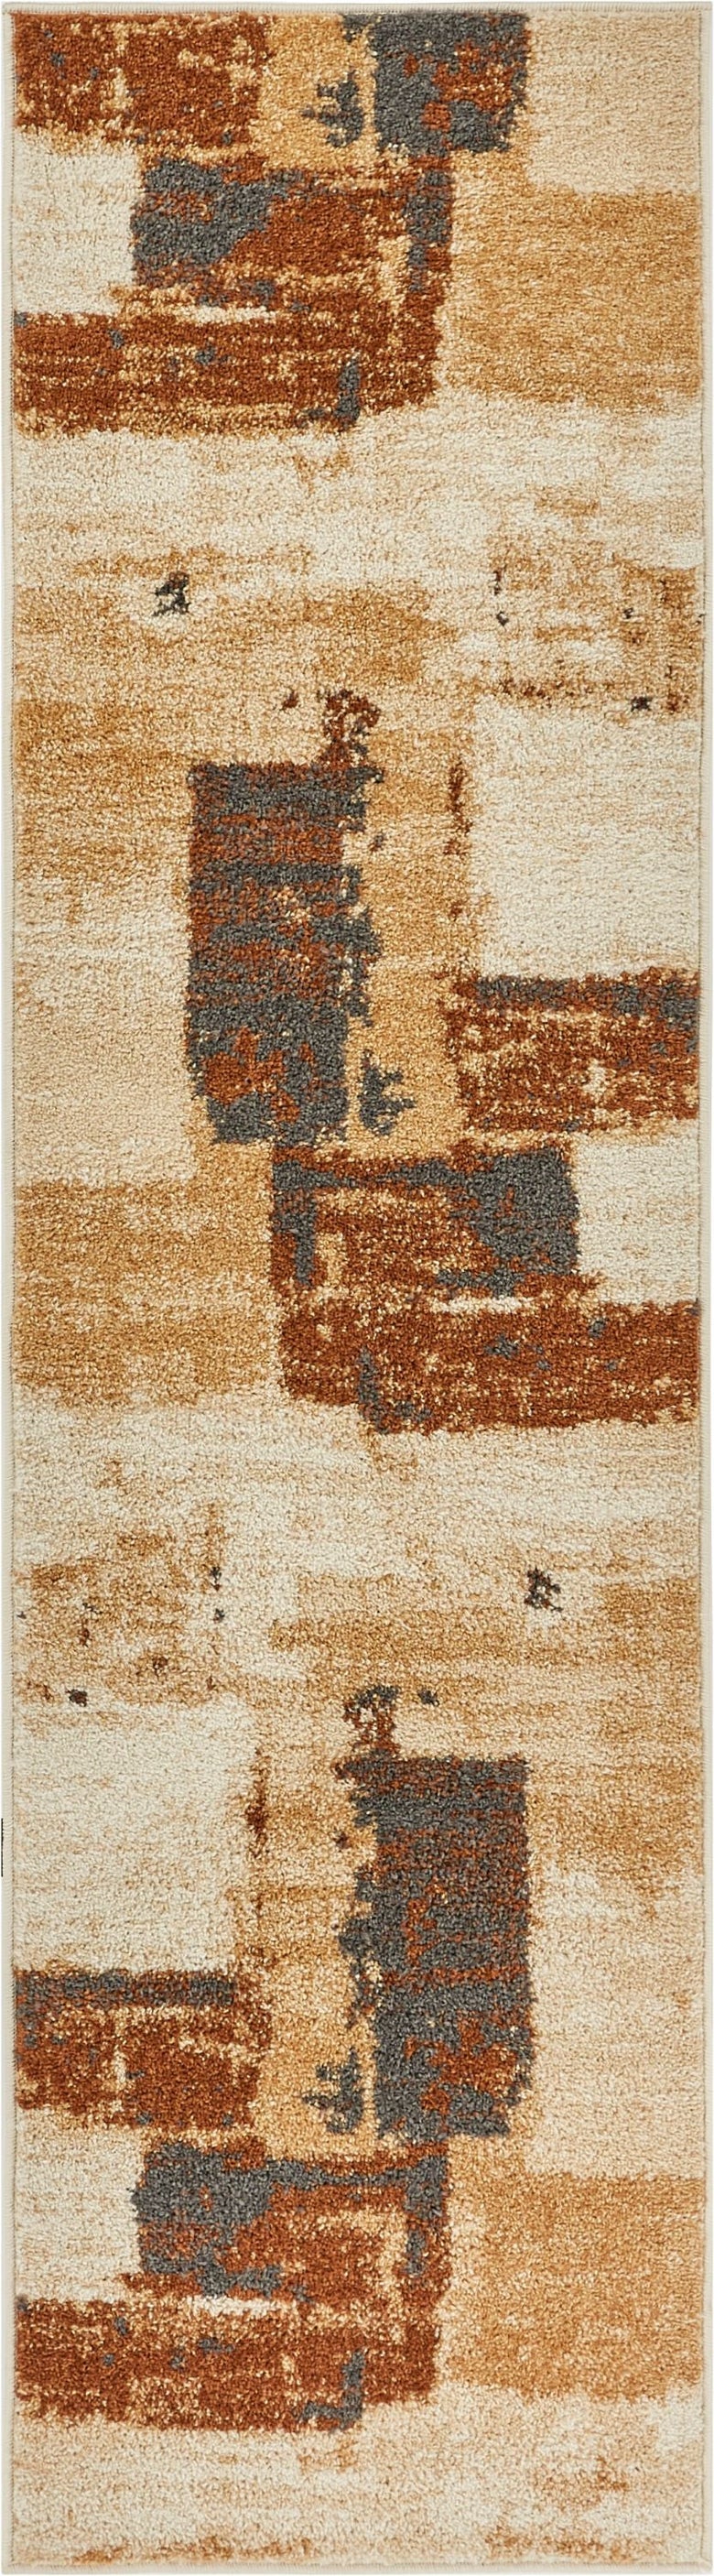 Central Park Brown Abstract Brushstrokes Rug MC-158